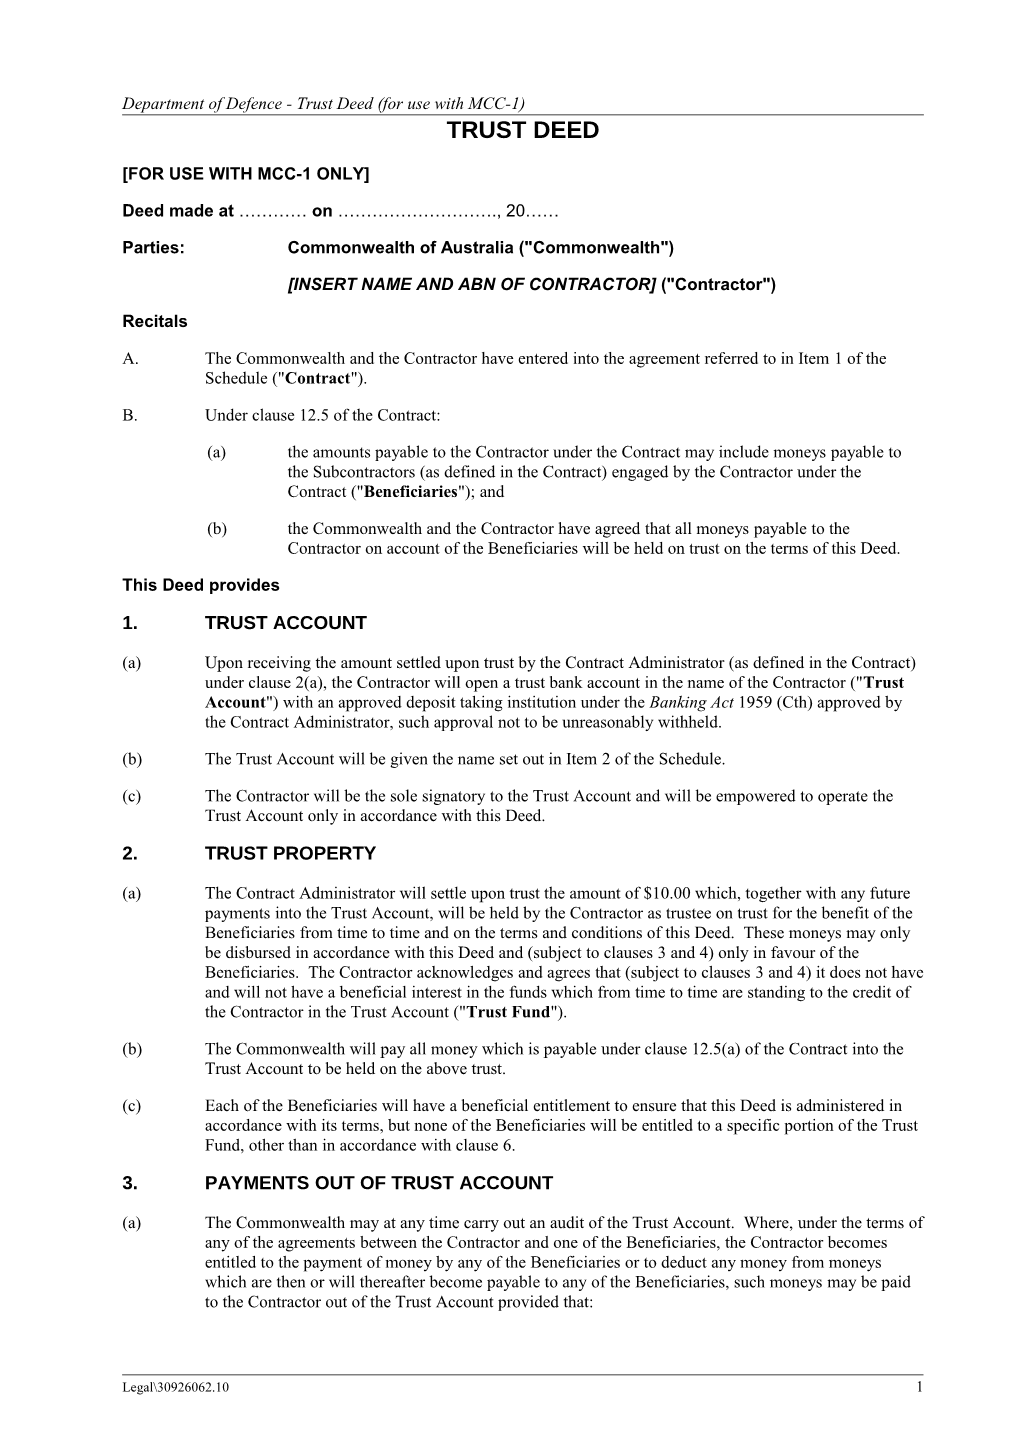 Department of Defence - Trust Deed (For Use with MCC-1)